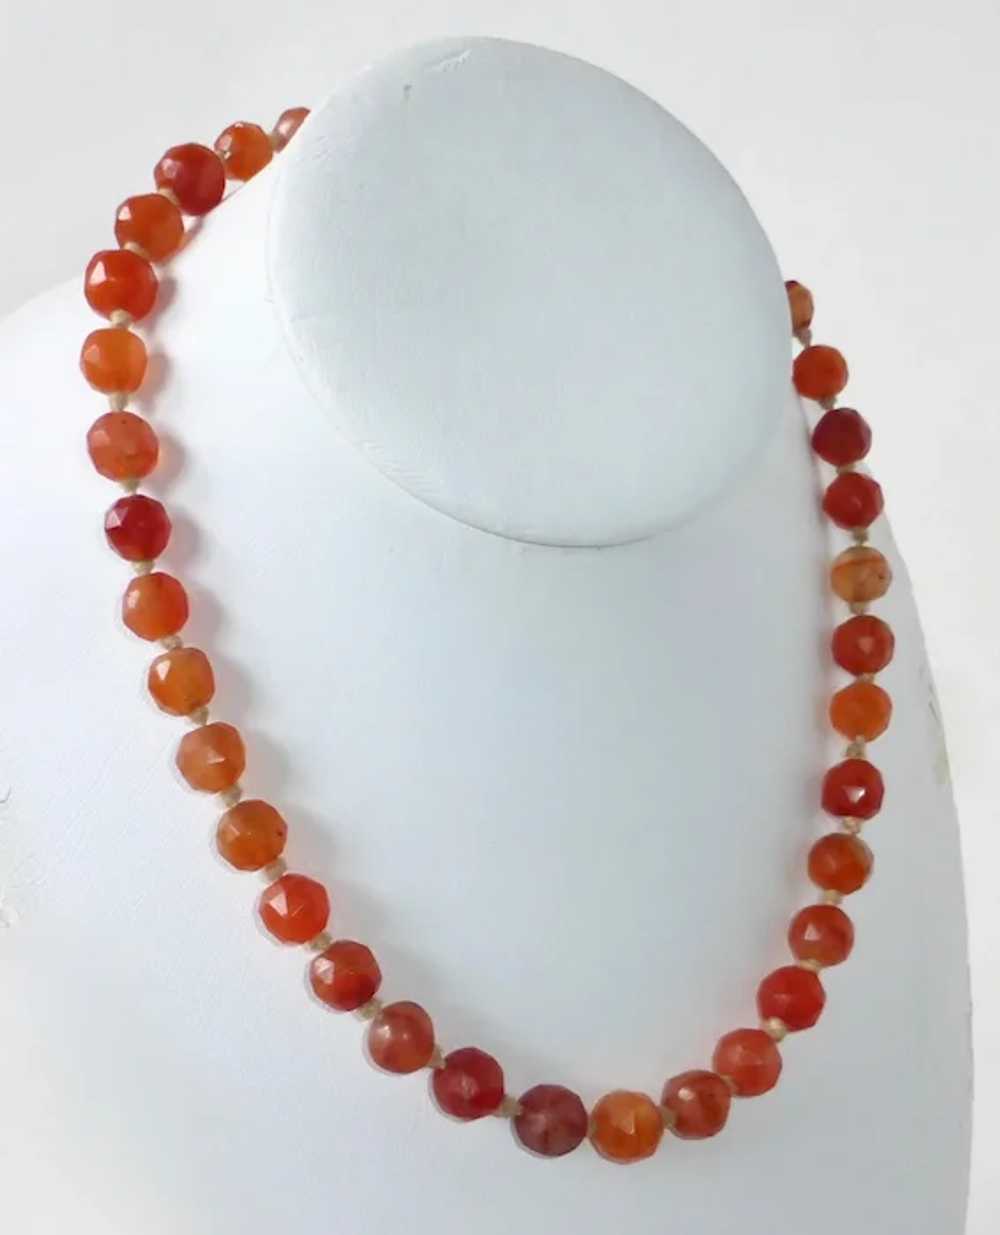 Antique Faceted Carnelian Agate Bead Necklace - image 5